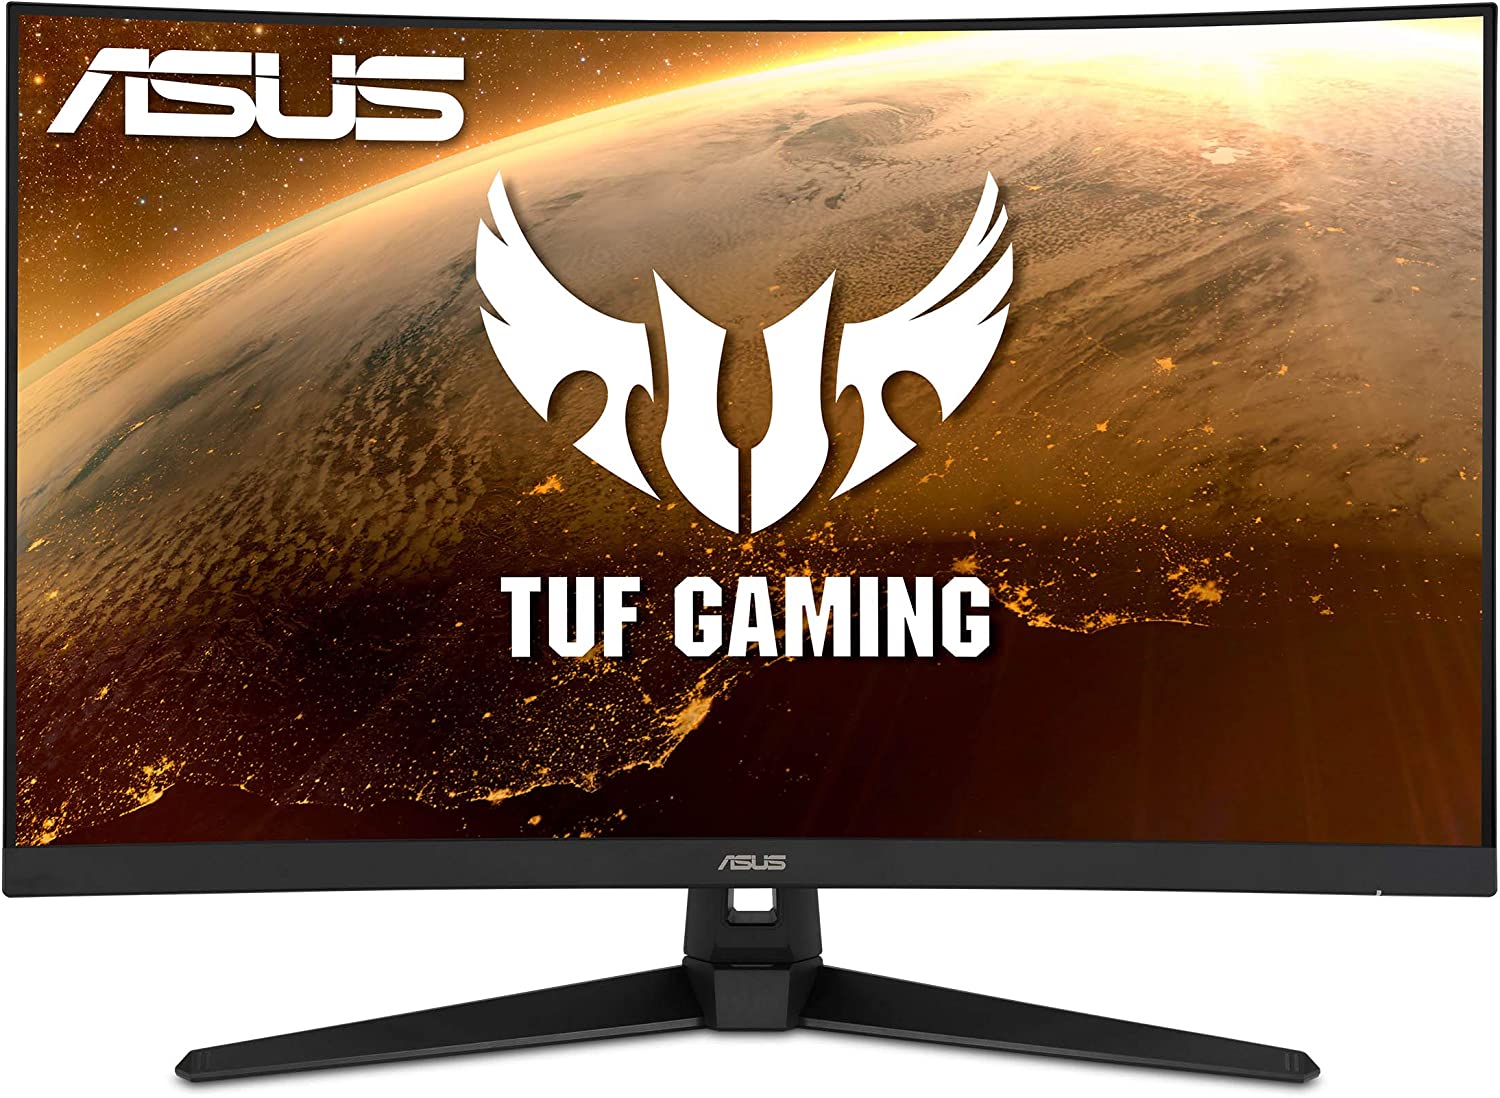 ASUS TUF Gaming 32 1080P Curved Monitor (VG328H1B) - Full HD, 165Hz (Supports 144Hz), 1ms, Extreme Low Motion Blur, Speaker, Adaptive-Sync, FreeSync